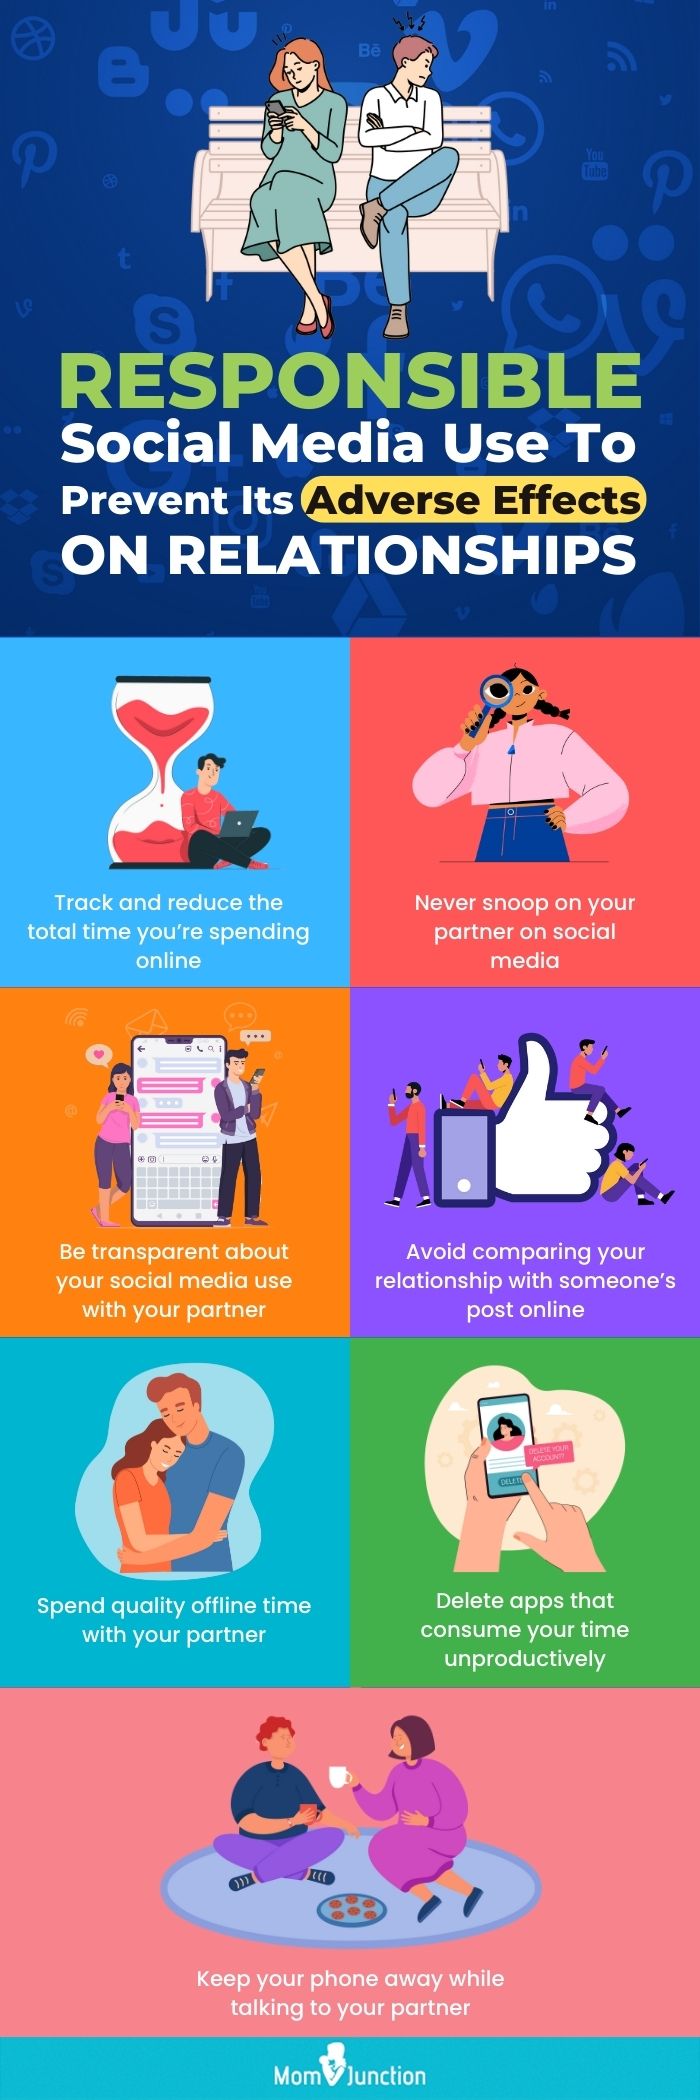 responsible social media use to prevent its adverse effects on relationships (infographic)